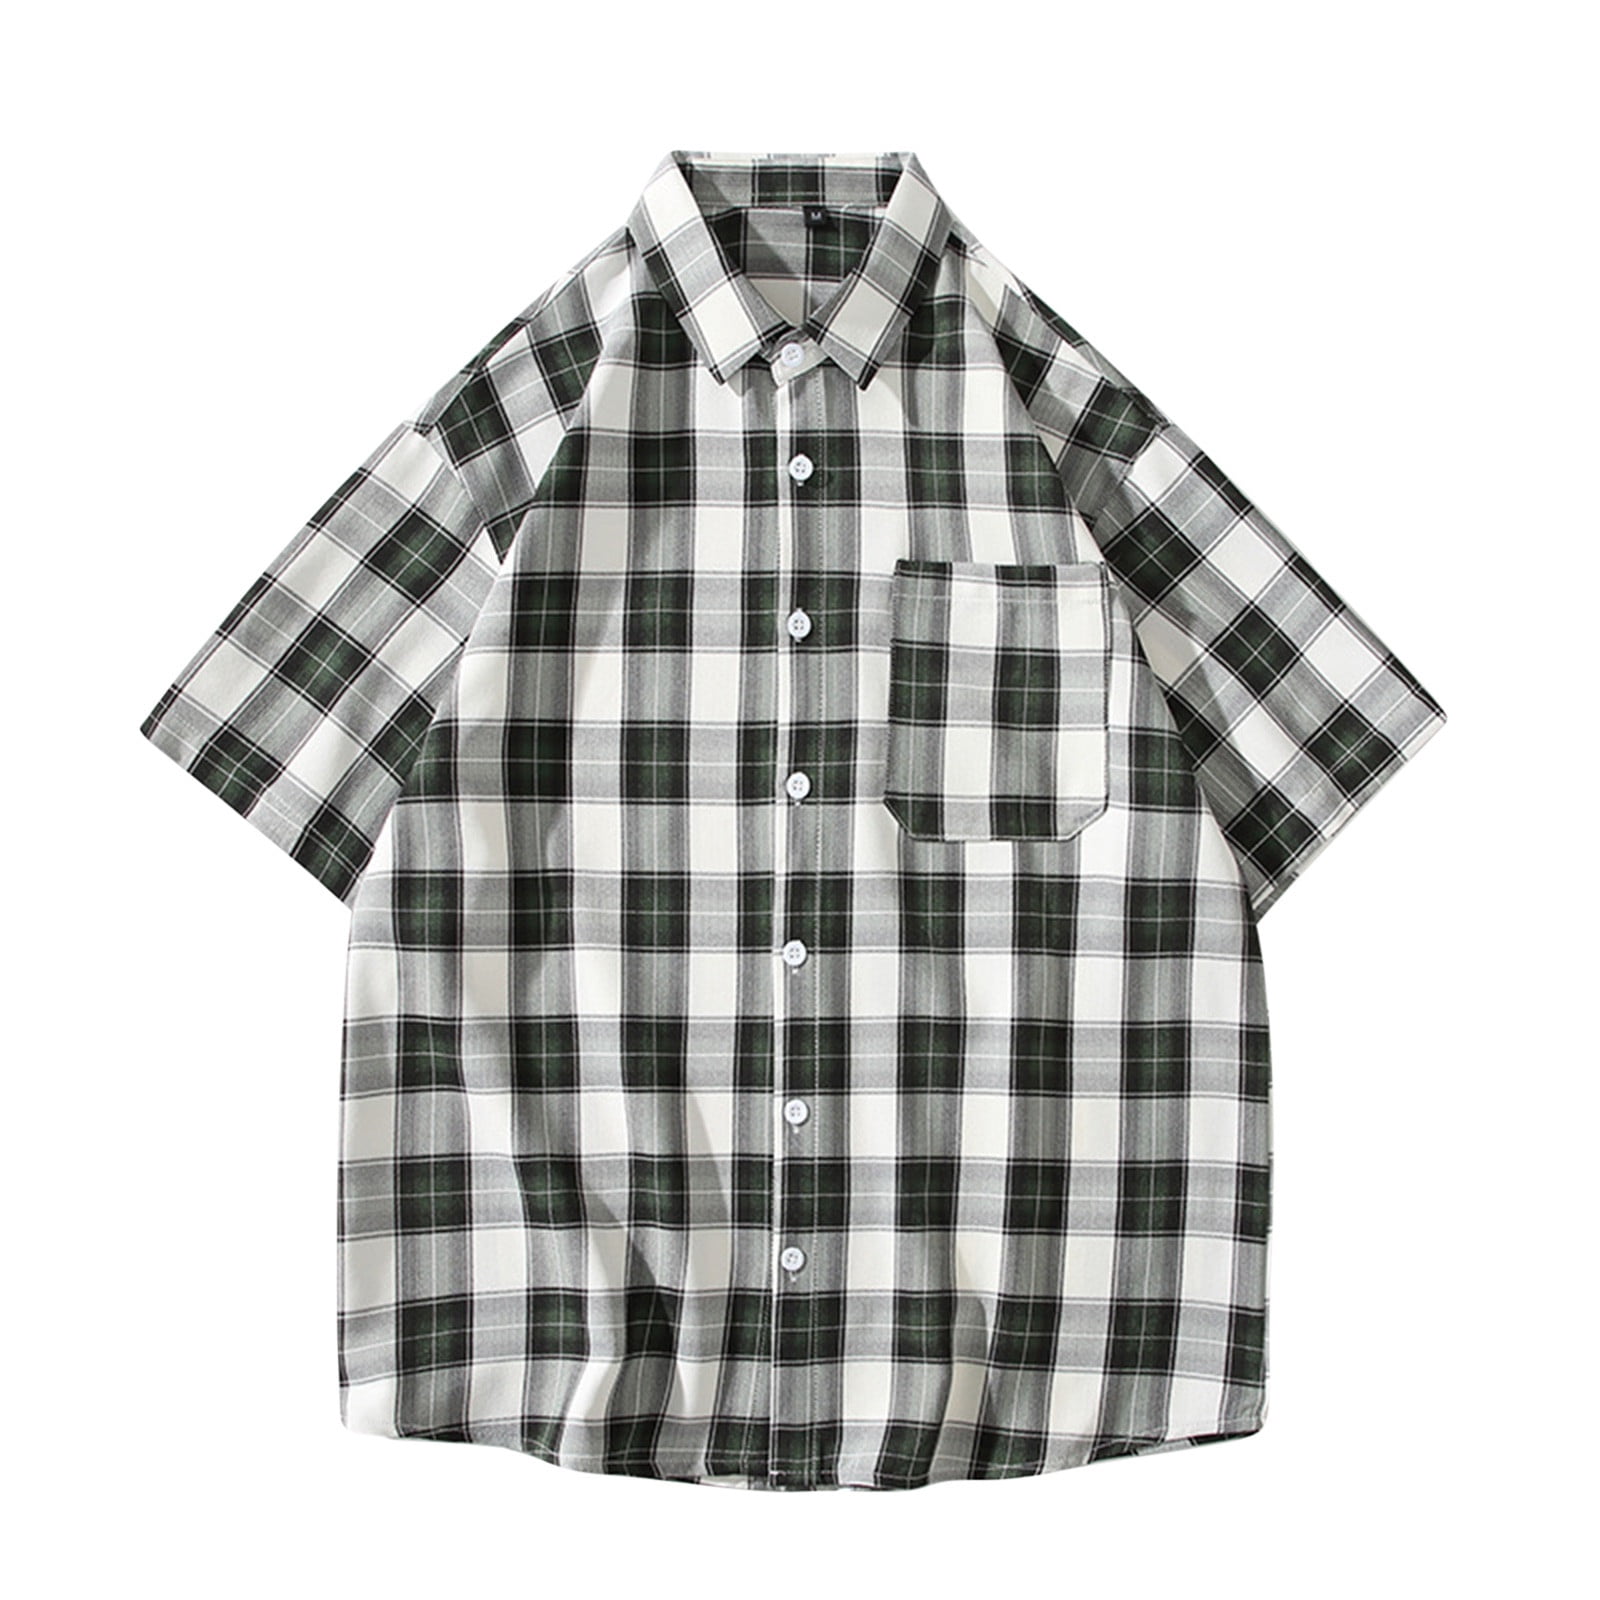 YYDGH Men's Plaid Dress Shirt Classic Fit Casual Short Sleeve Button Down  Shirts with Pocket Gray L